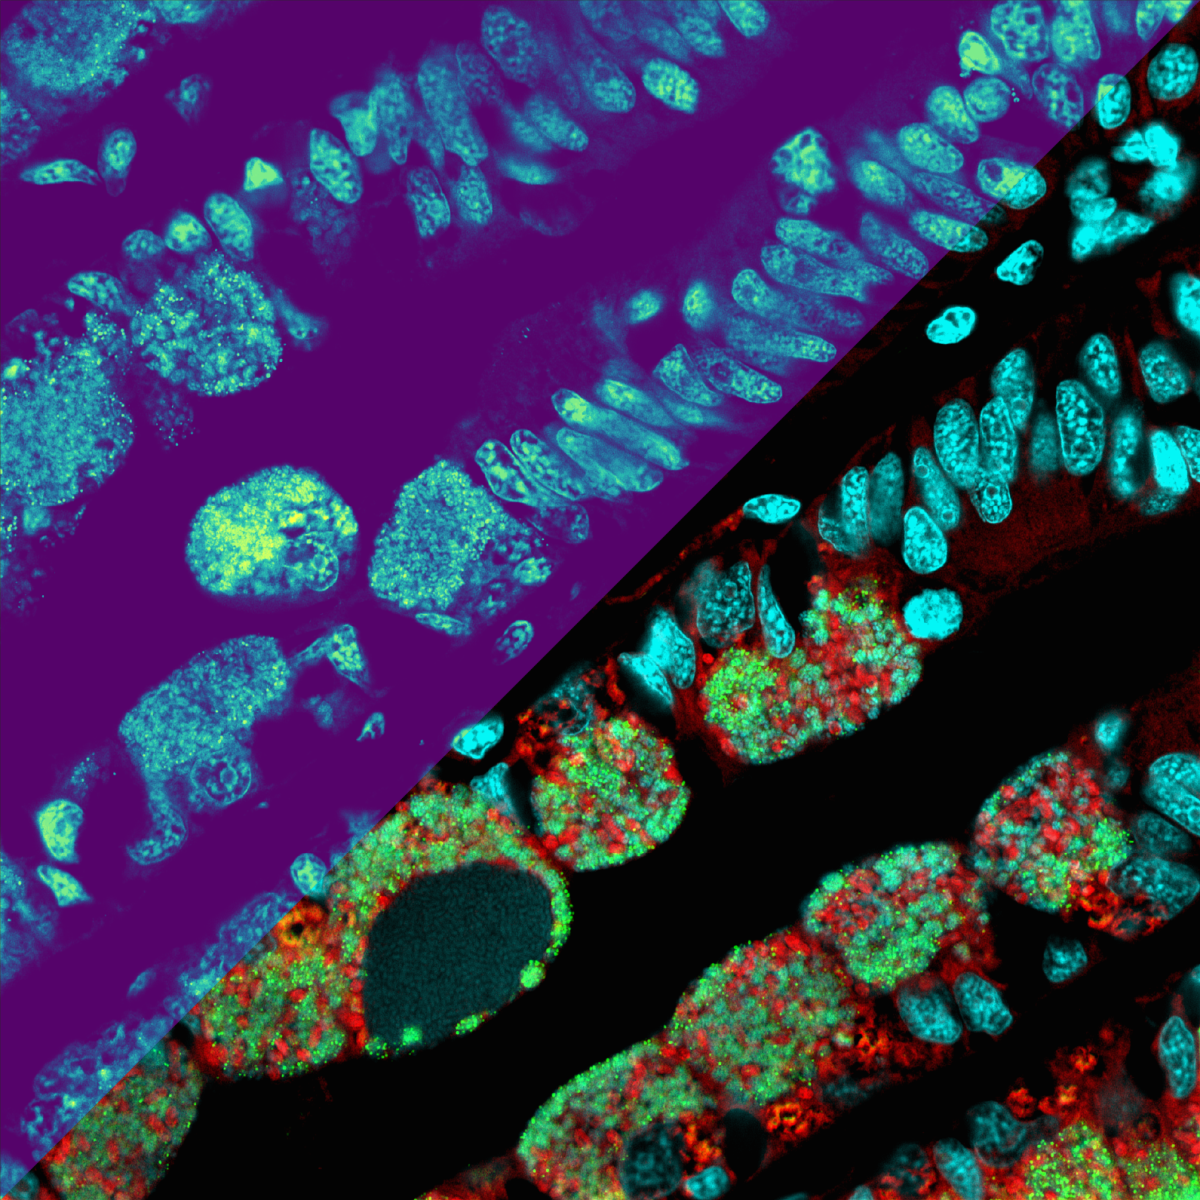 The metabolite distributions as a heat map (left part of the figure): the lighter the colour, the higher the concentration of metabolites (microscopy MSI replica for illustration). The right side of the image shows microscopic details of the microbes (in red and green) and the mussel cell nuclei (cyan). (© Max Planck Institute for Marine Microbiology, B. Geier)